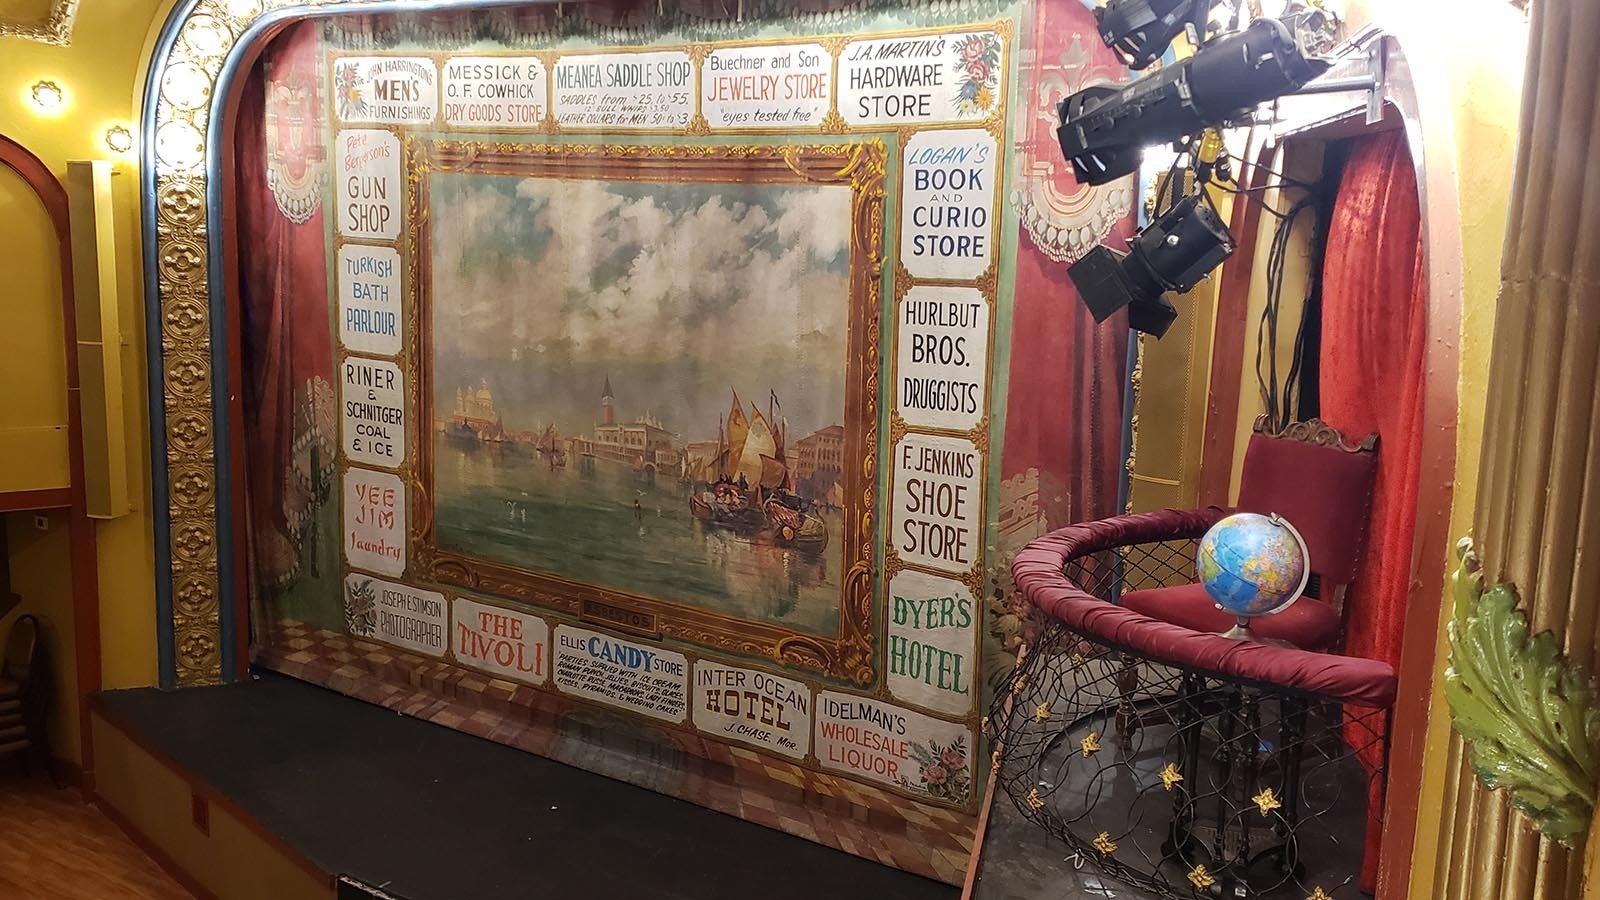 The vintage 1907-08 asbestos curtain was restored when Cheyenne's Capitol dome was restored by the same team. It cost $30,000 to restore. The scene is from Venice and the businesses around it were sponsors of the time. Of them, only the Tivoli still survives.